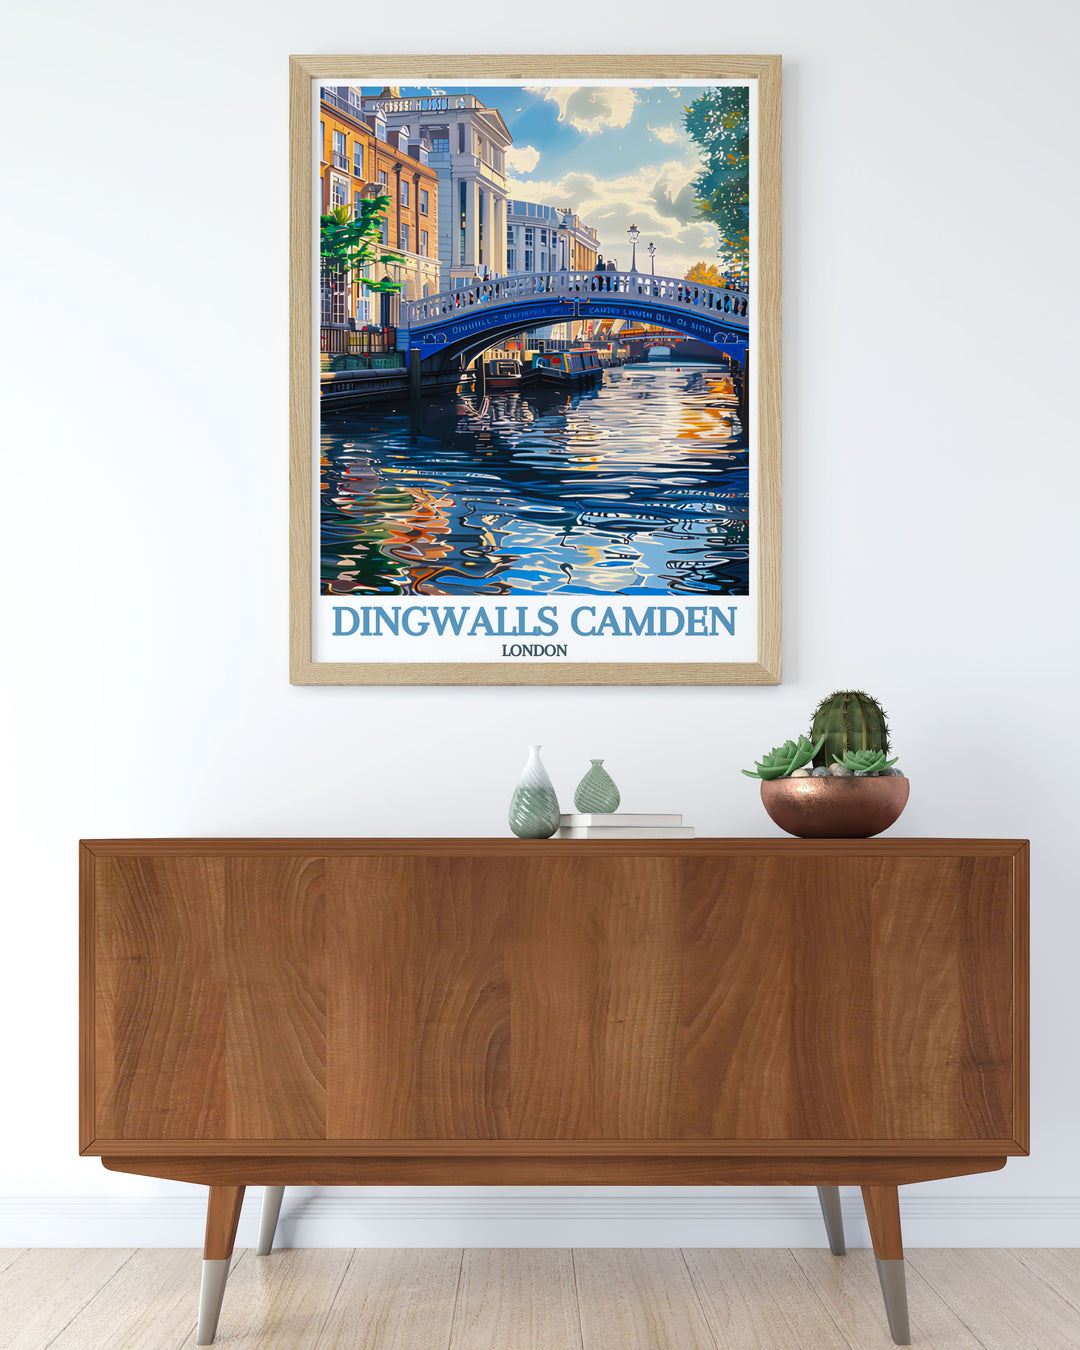 A detailed illustration of Camdens bustling markets, capturing the eclectic energy and diverse offerings, perfect for enhancing your living space or office decor.